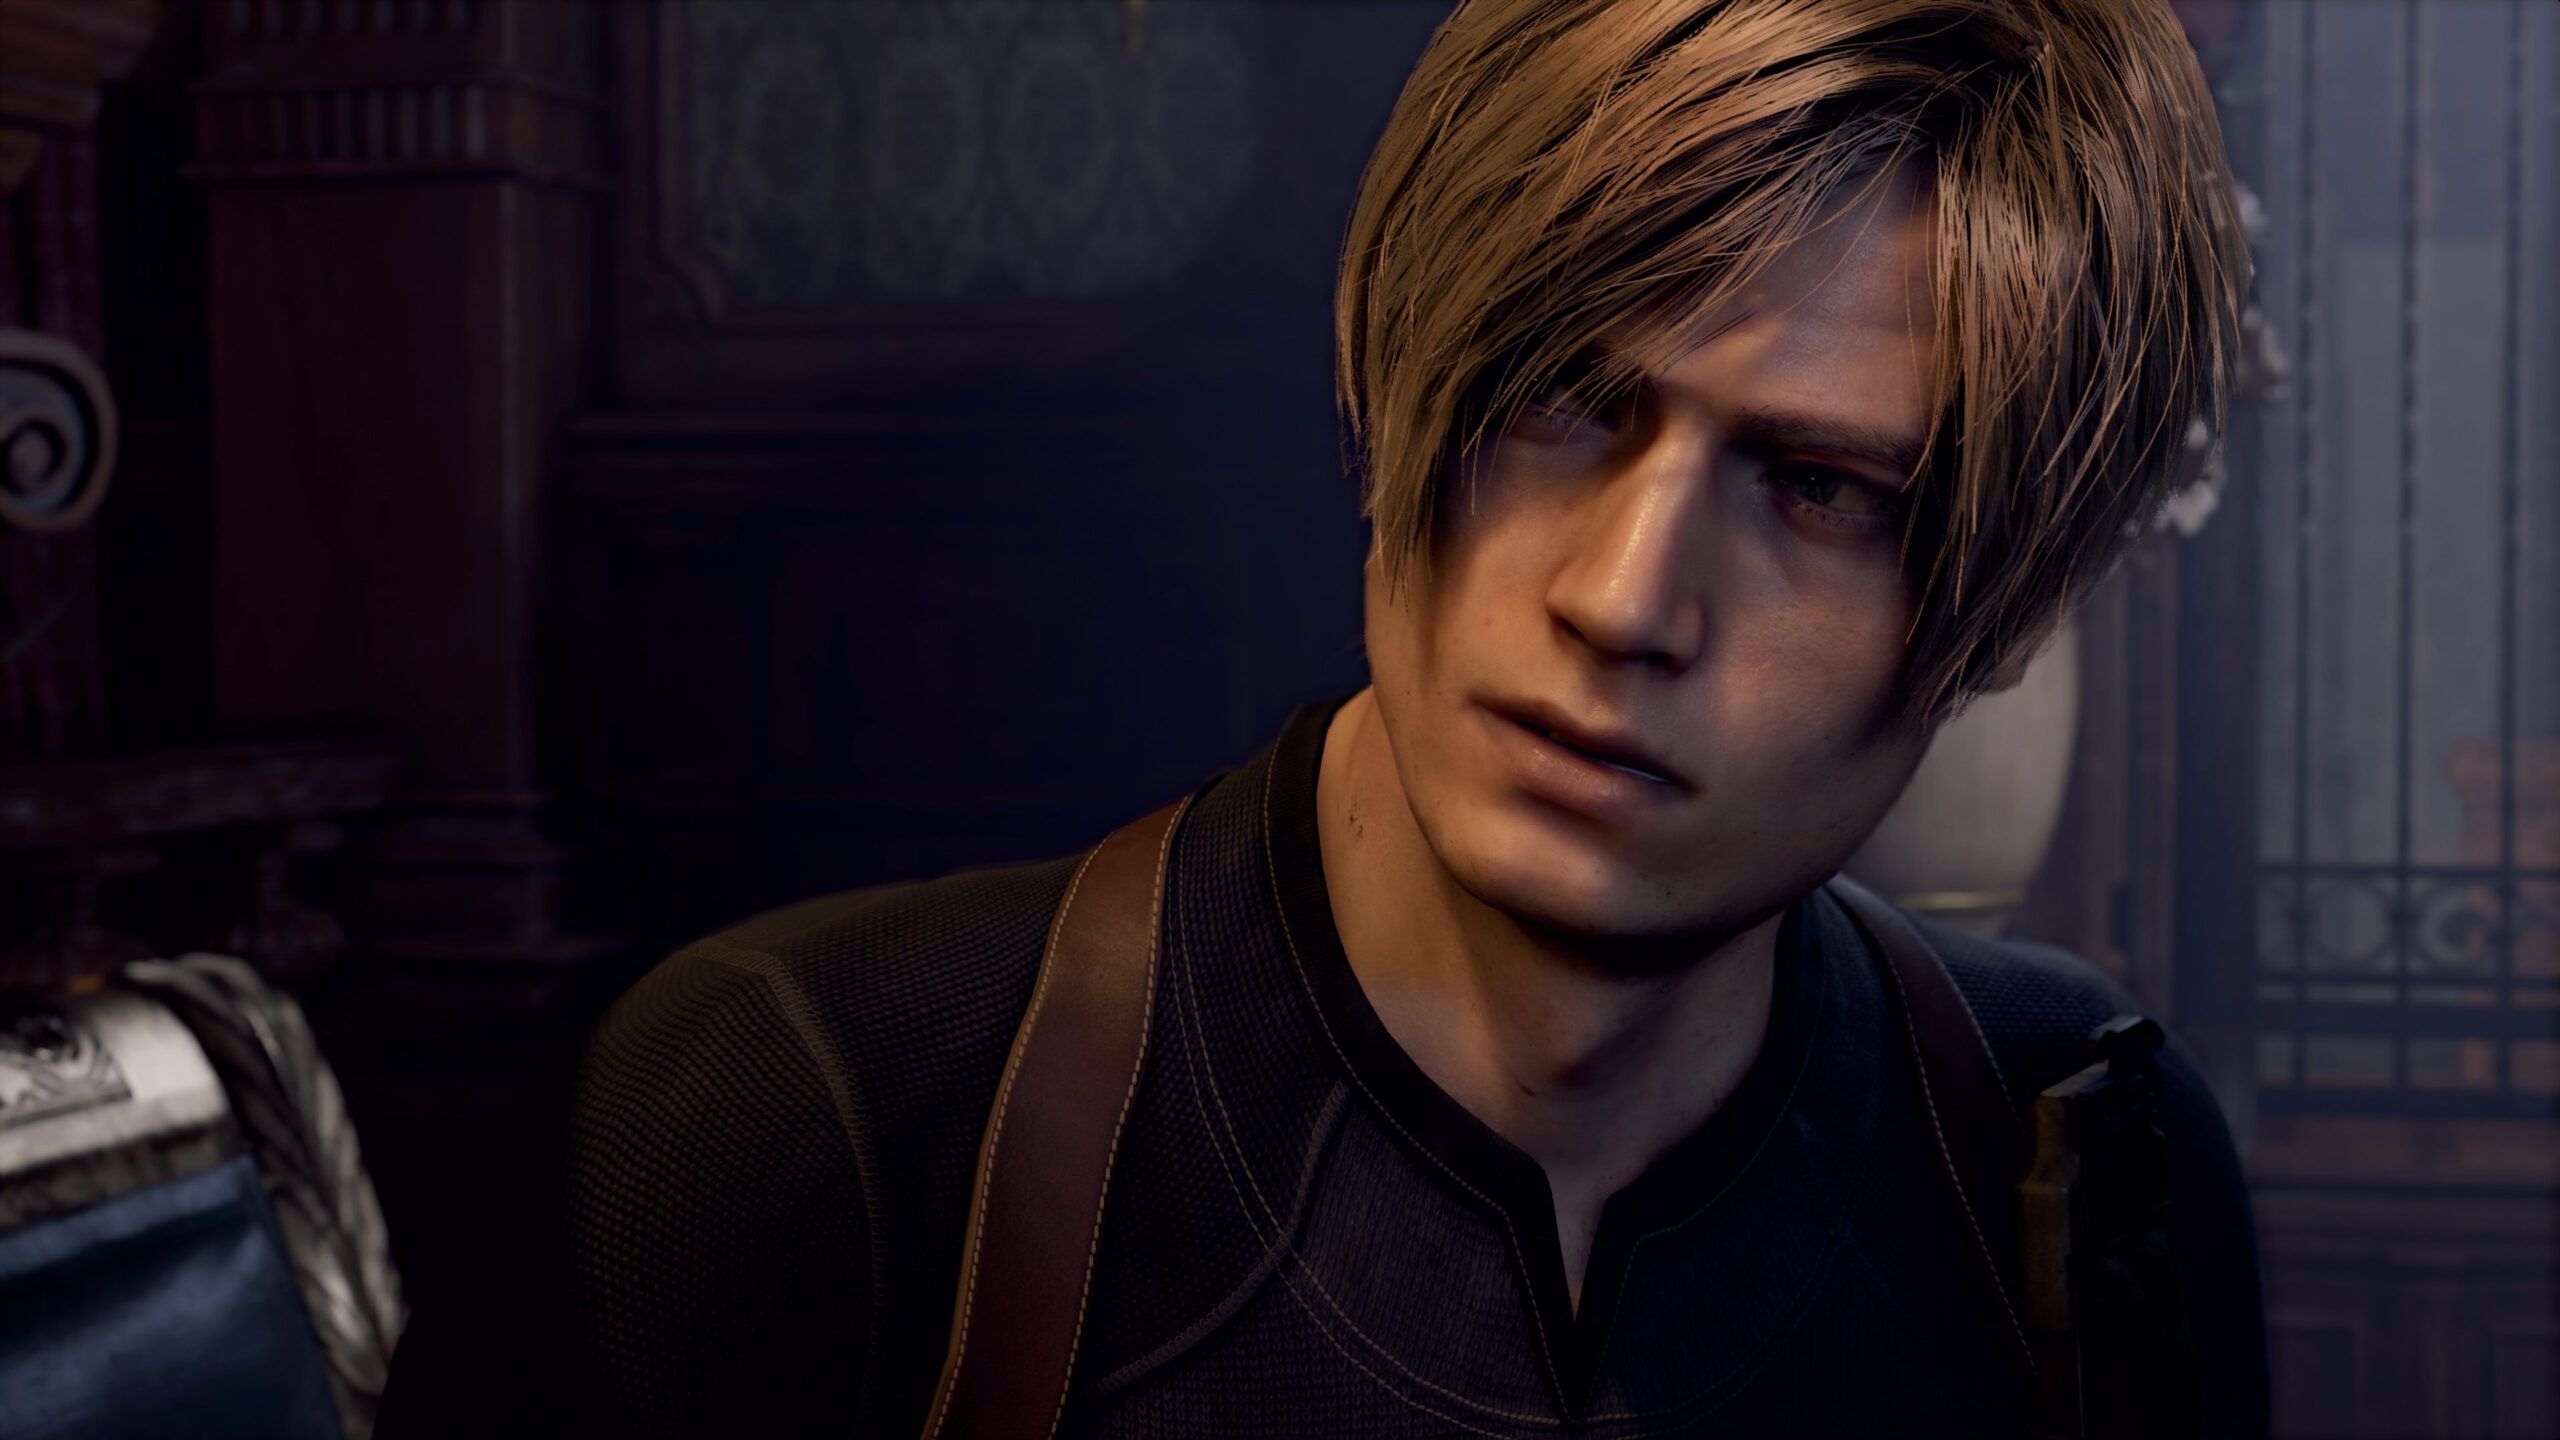 Resident Evil 4 releases today, March 24th - Free Demo is also available  for download